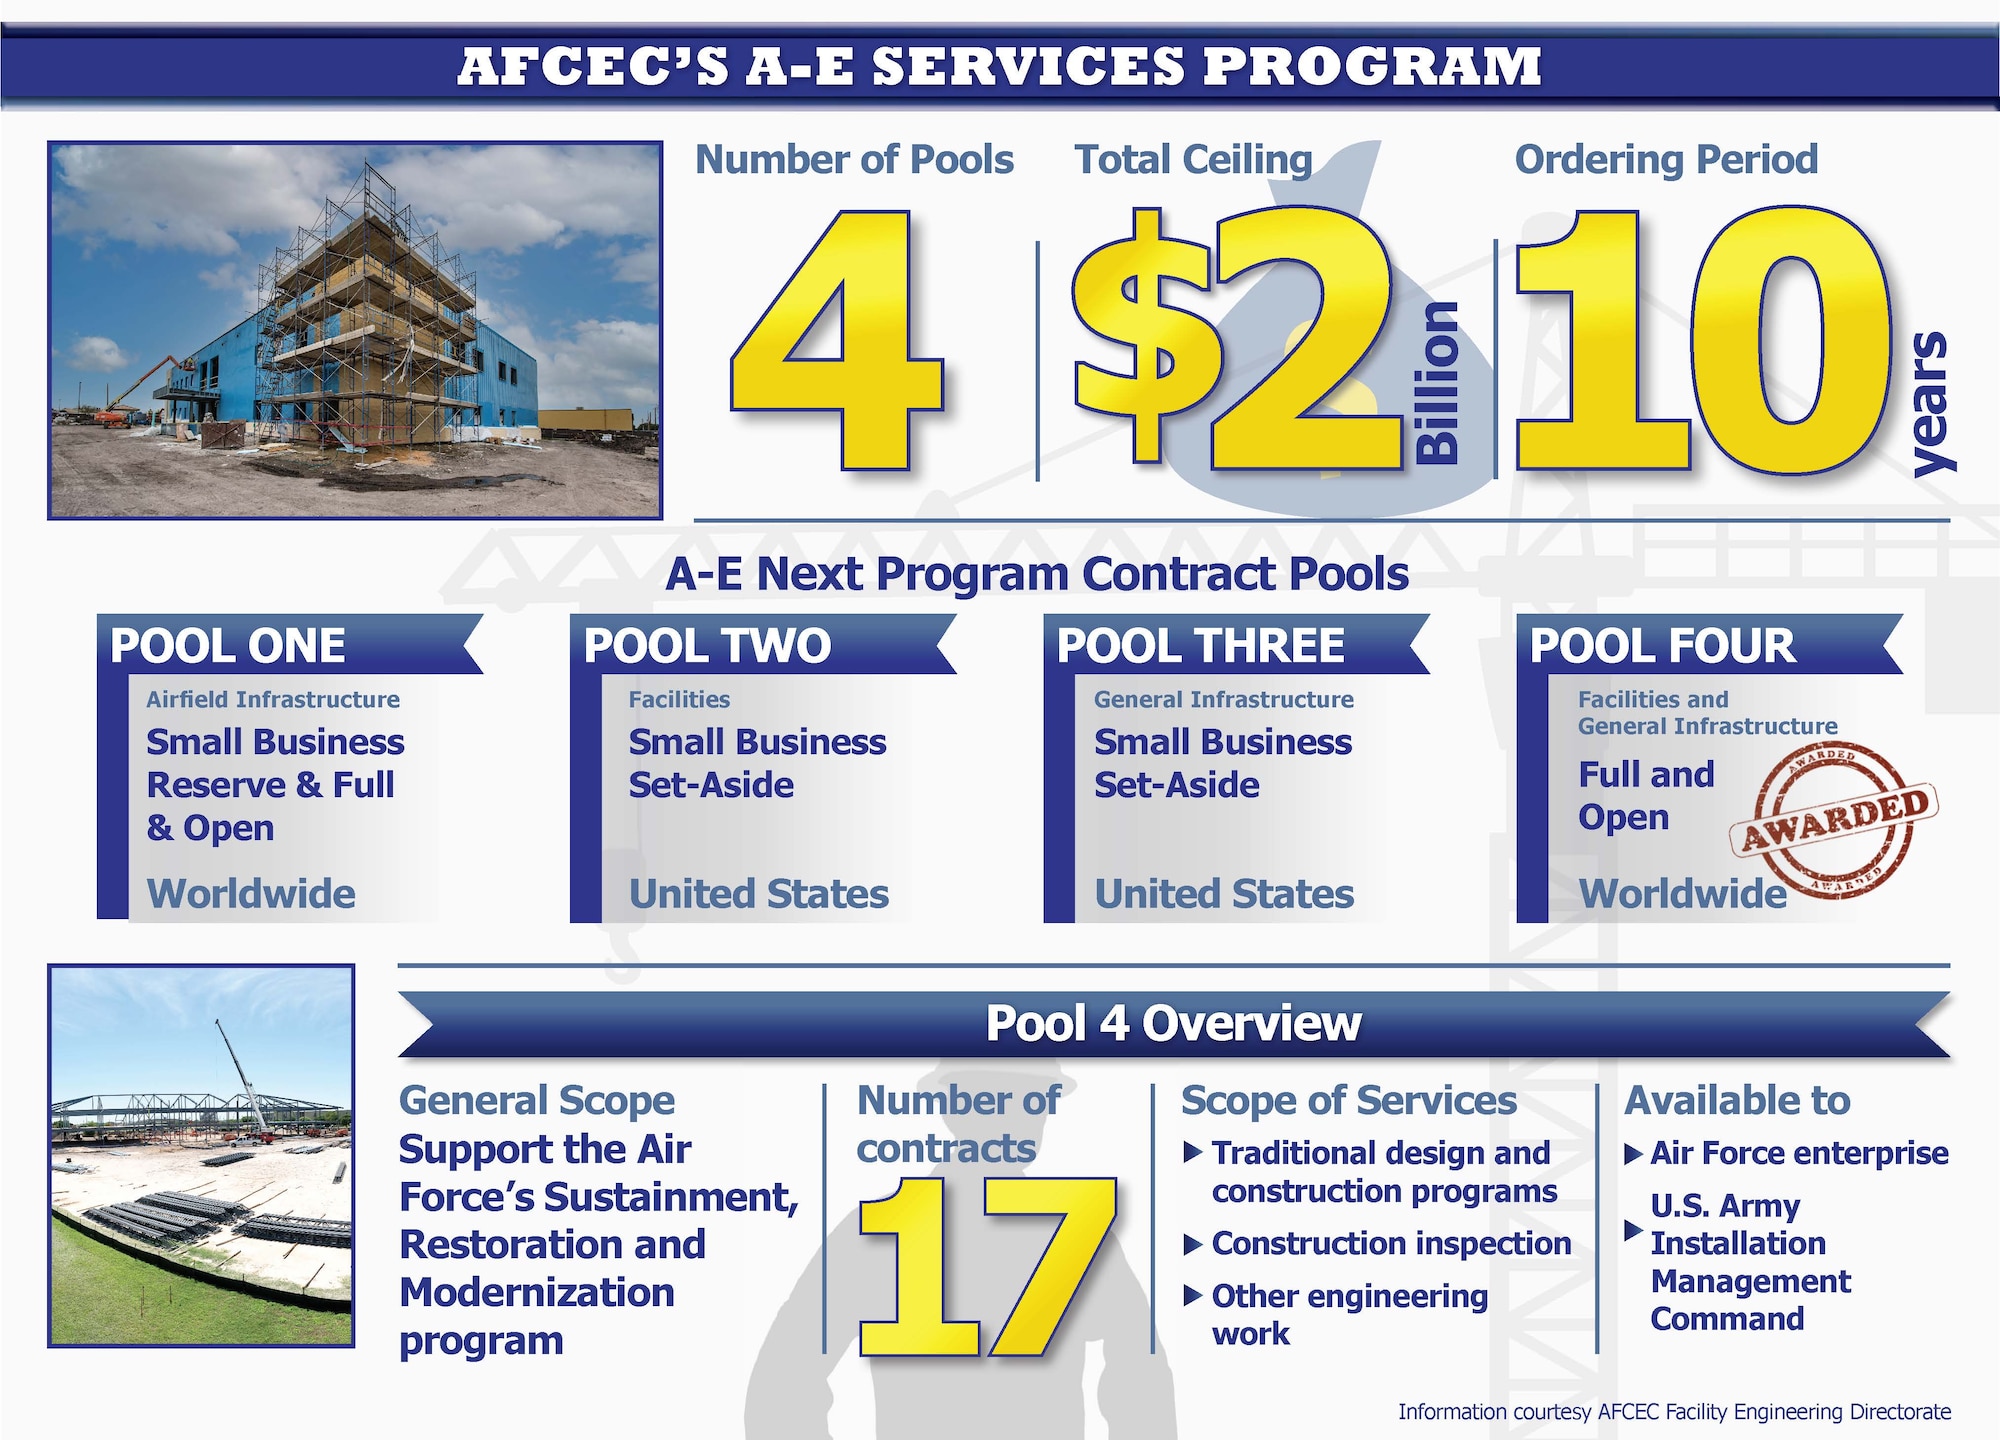 Information graphic details the Air Force Civil Engineer Center's architect and engineering services contracts to support the Air Force's sustainment, restoration and modernization program. The Pool 4 of the program was recently awarded with the remaining three pools expected to be awarded later this year.